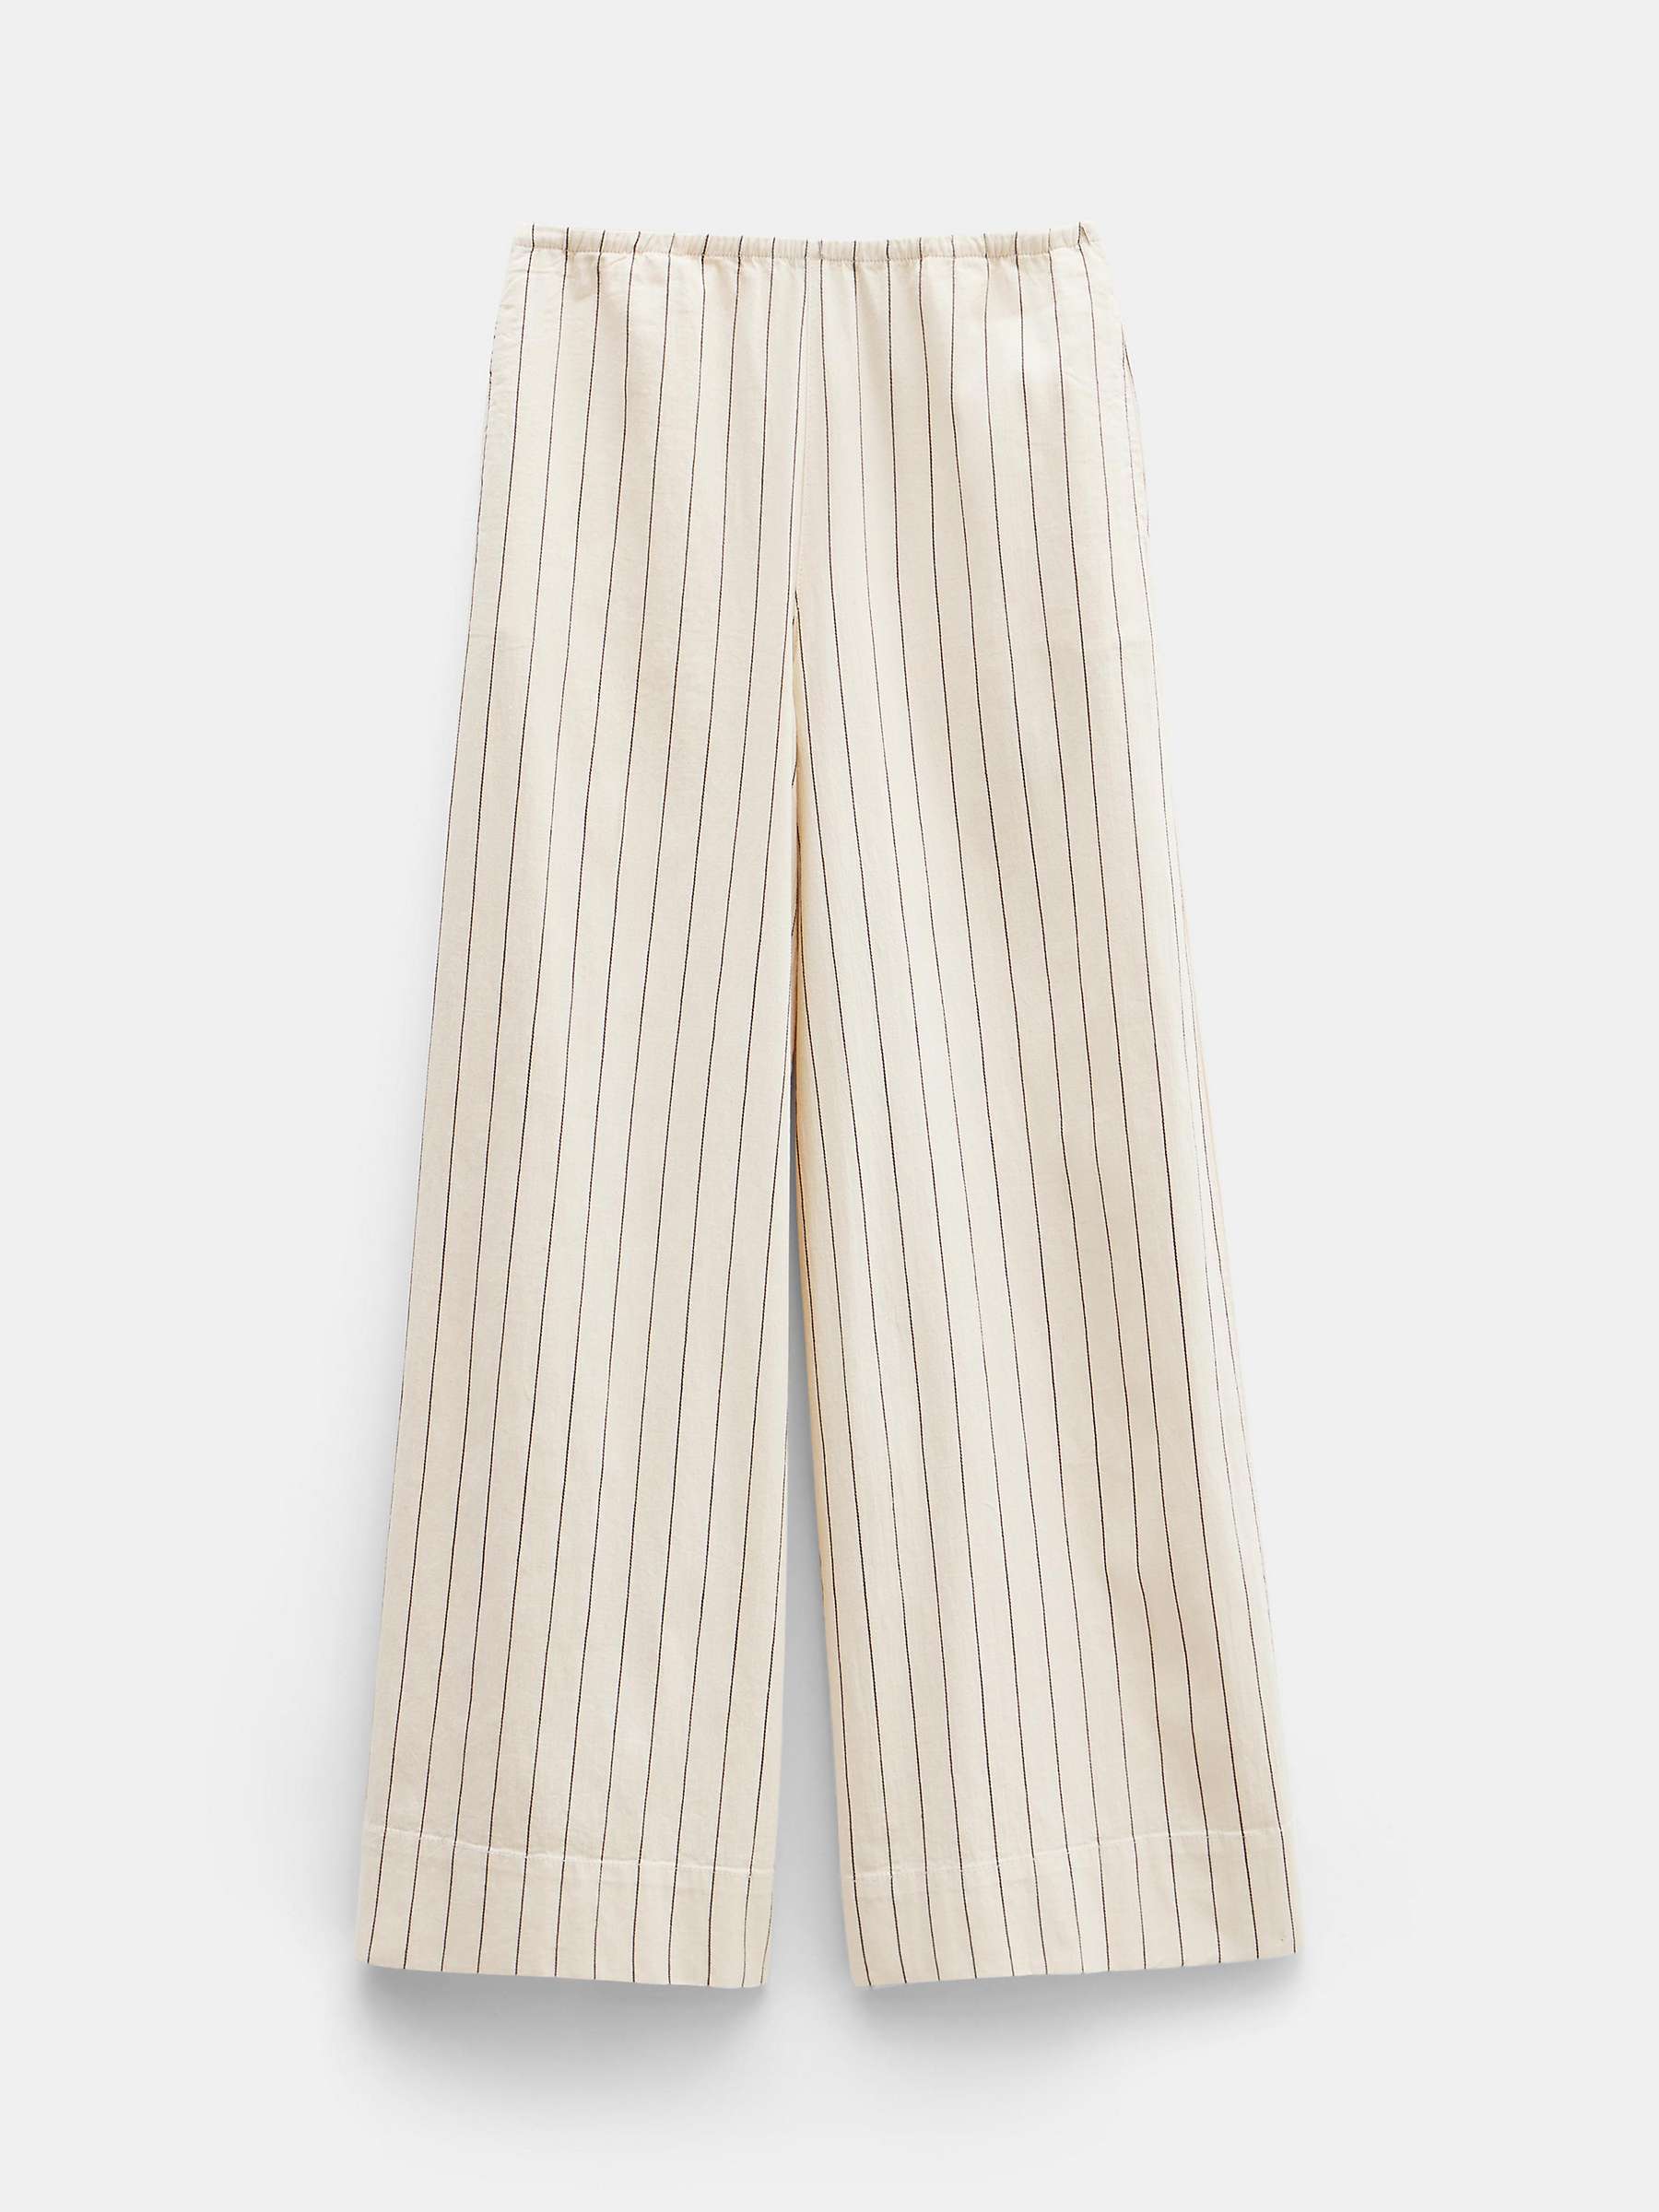 Buy HUSH Elissia Striped Wide Leg Trousers, White/Black Online at johnlewis.com